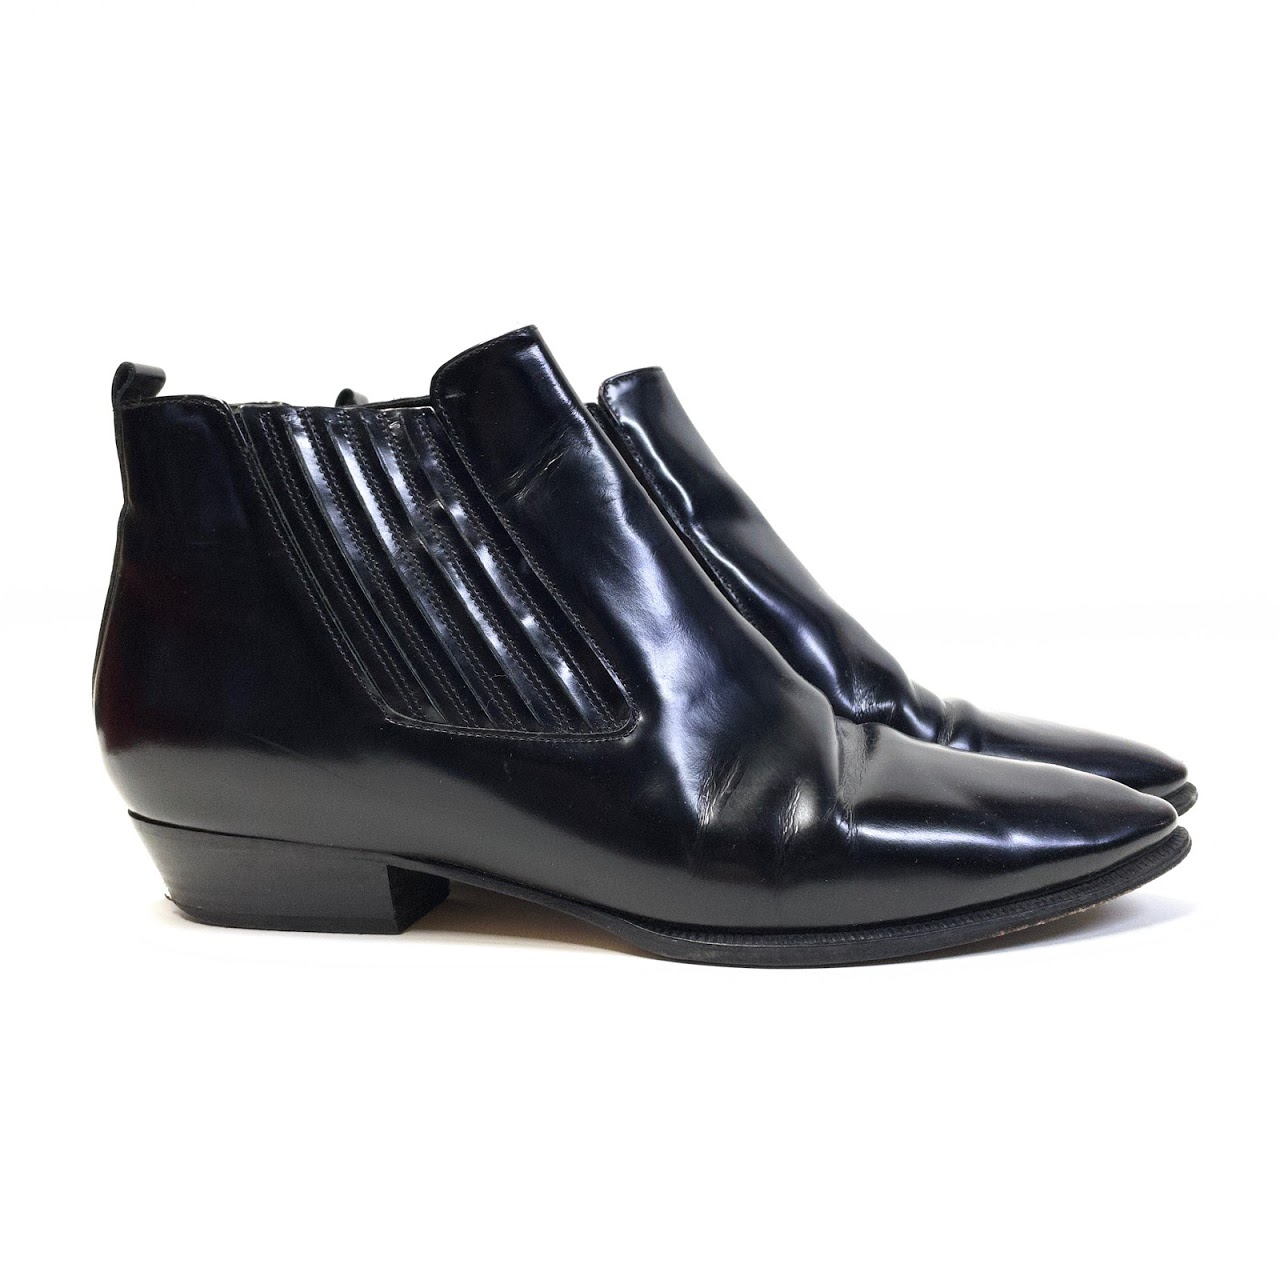 Isabel Marant Patent Leather Ankle Boots